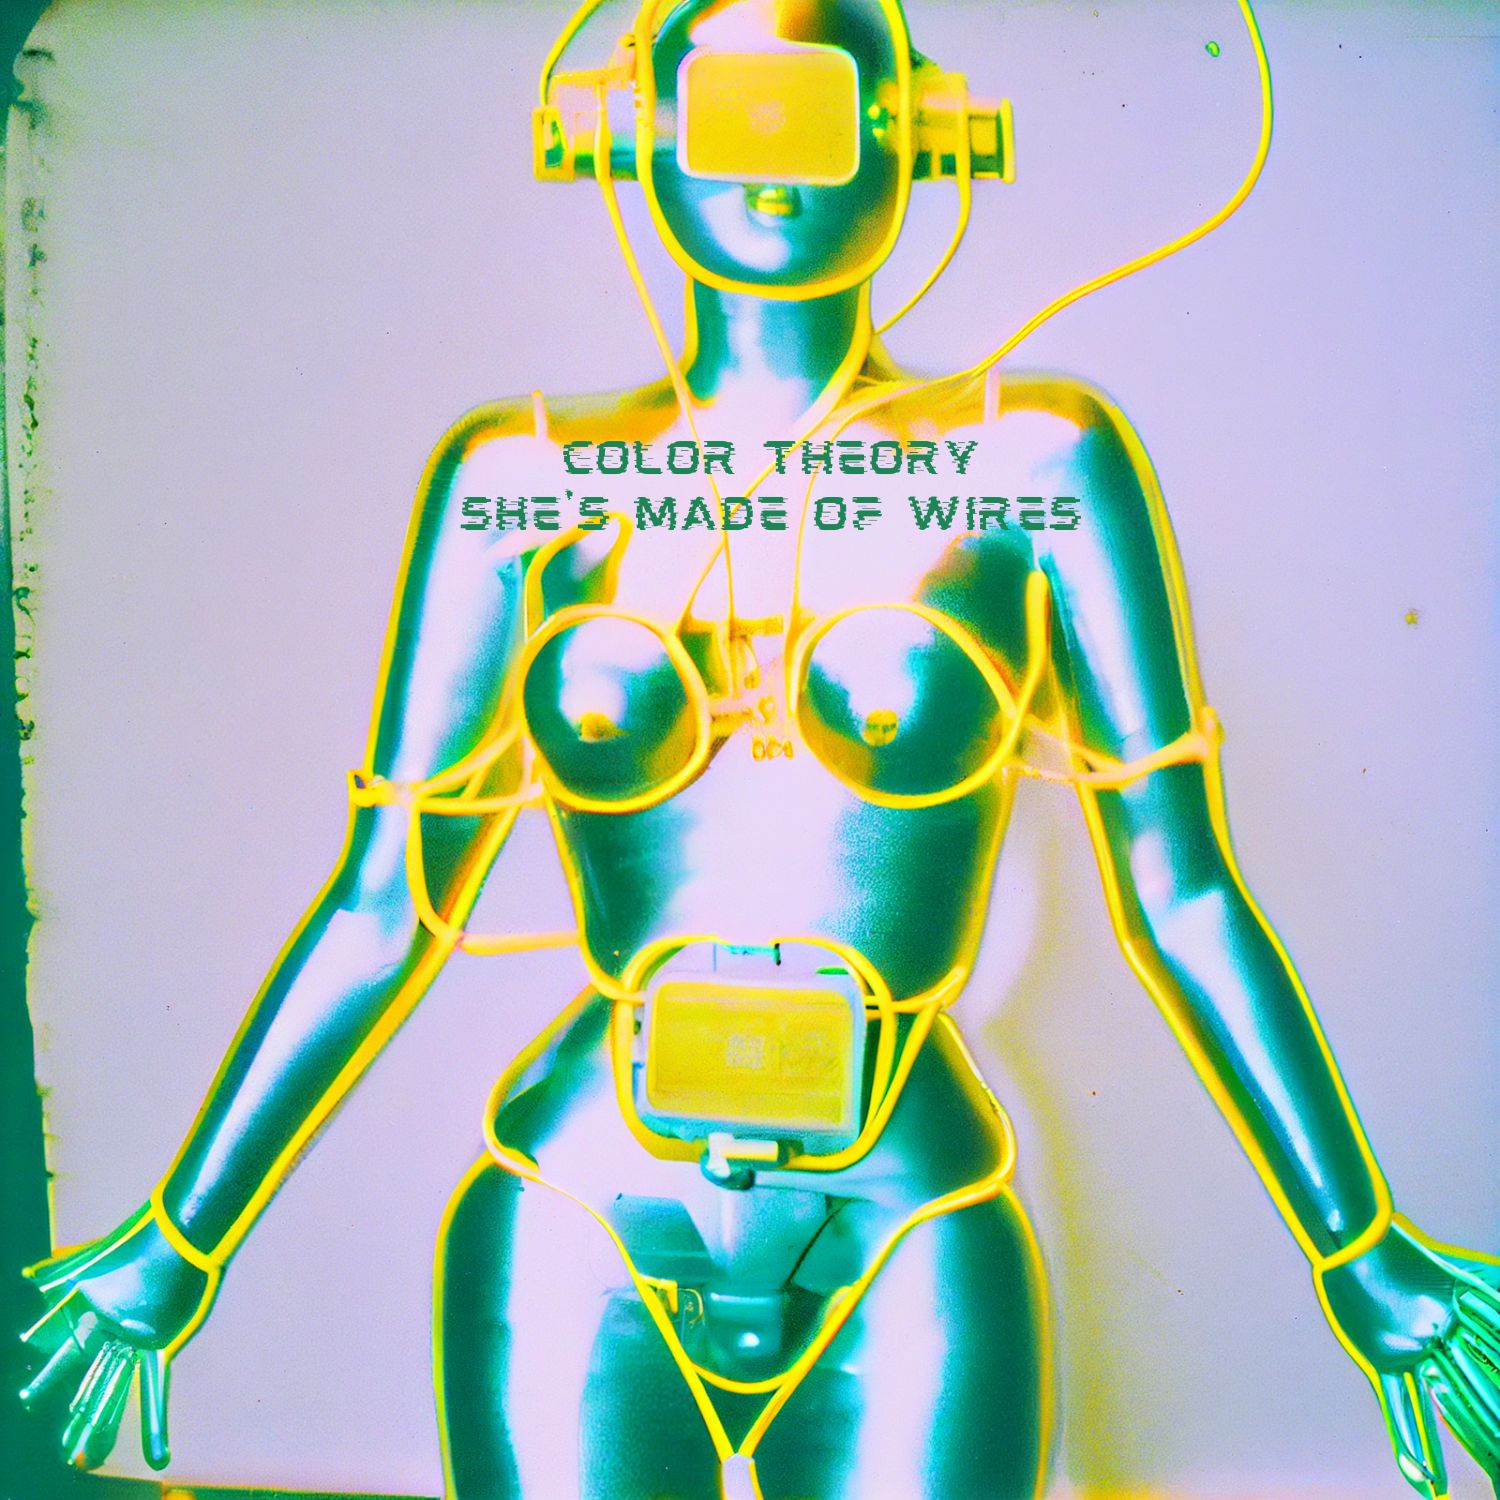 She's Made of Wires cover art